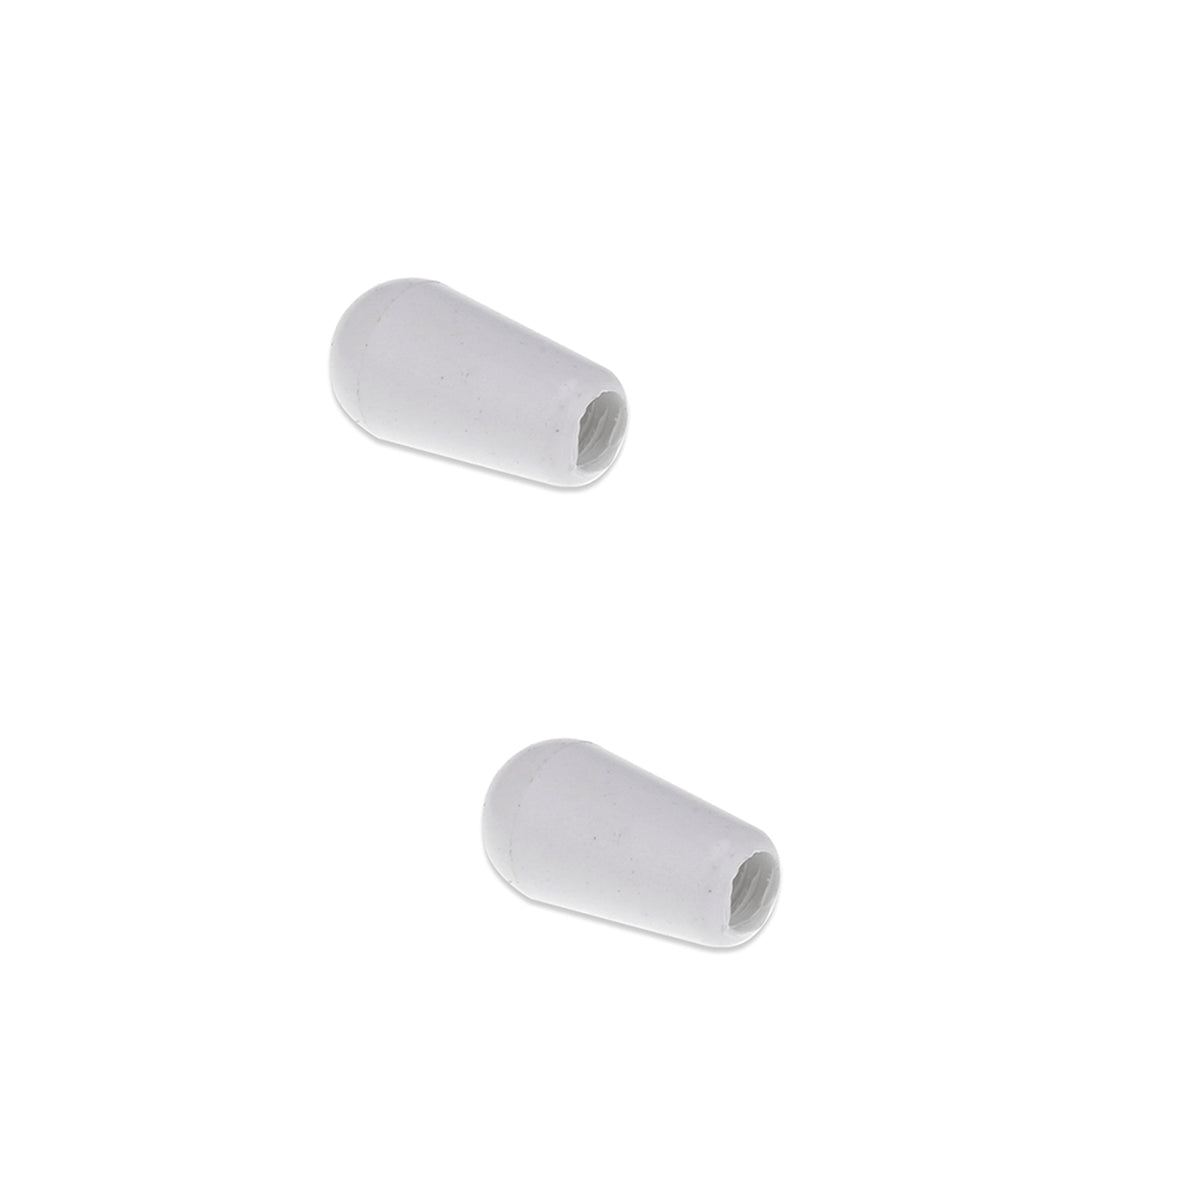 Musiclily Pro Inch Size Thread Plastic Guitar Toggle Pickup Switch Tips for LP Style, White(2 Pieces)